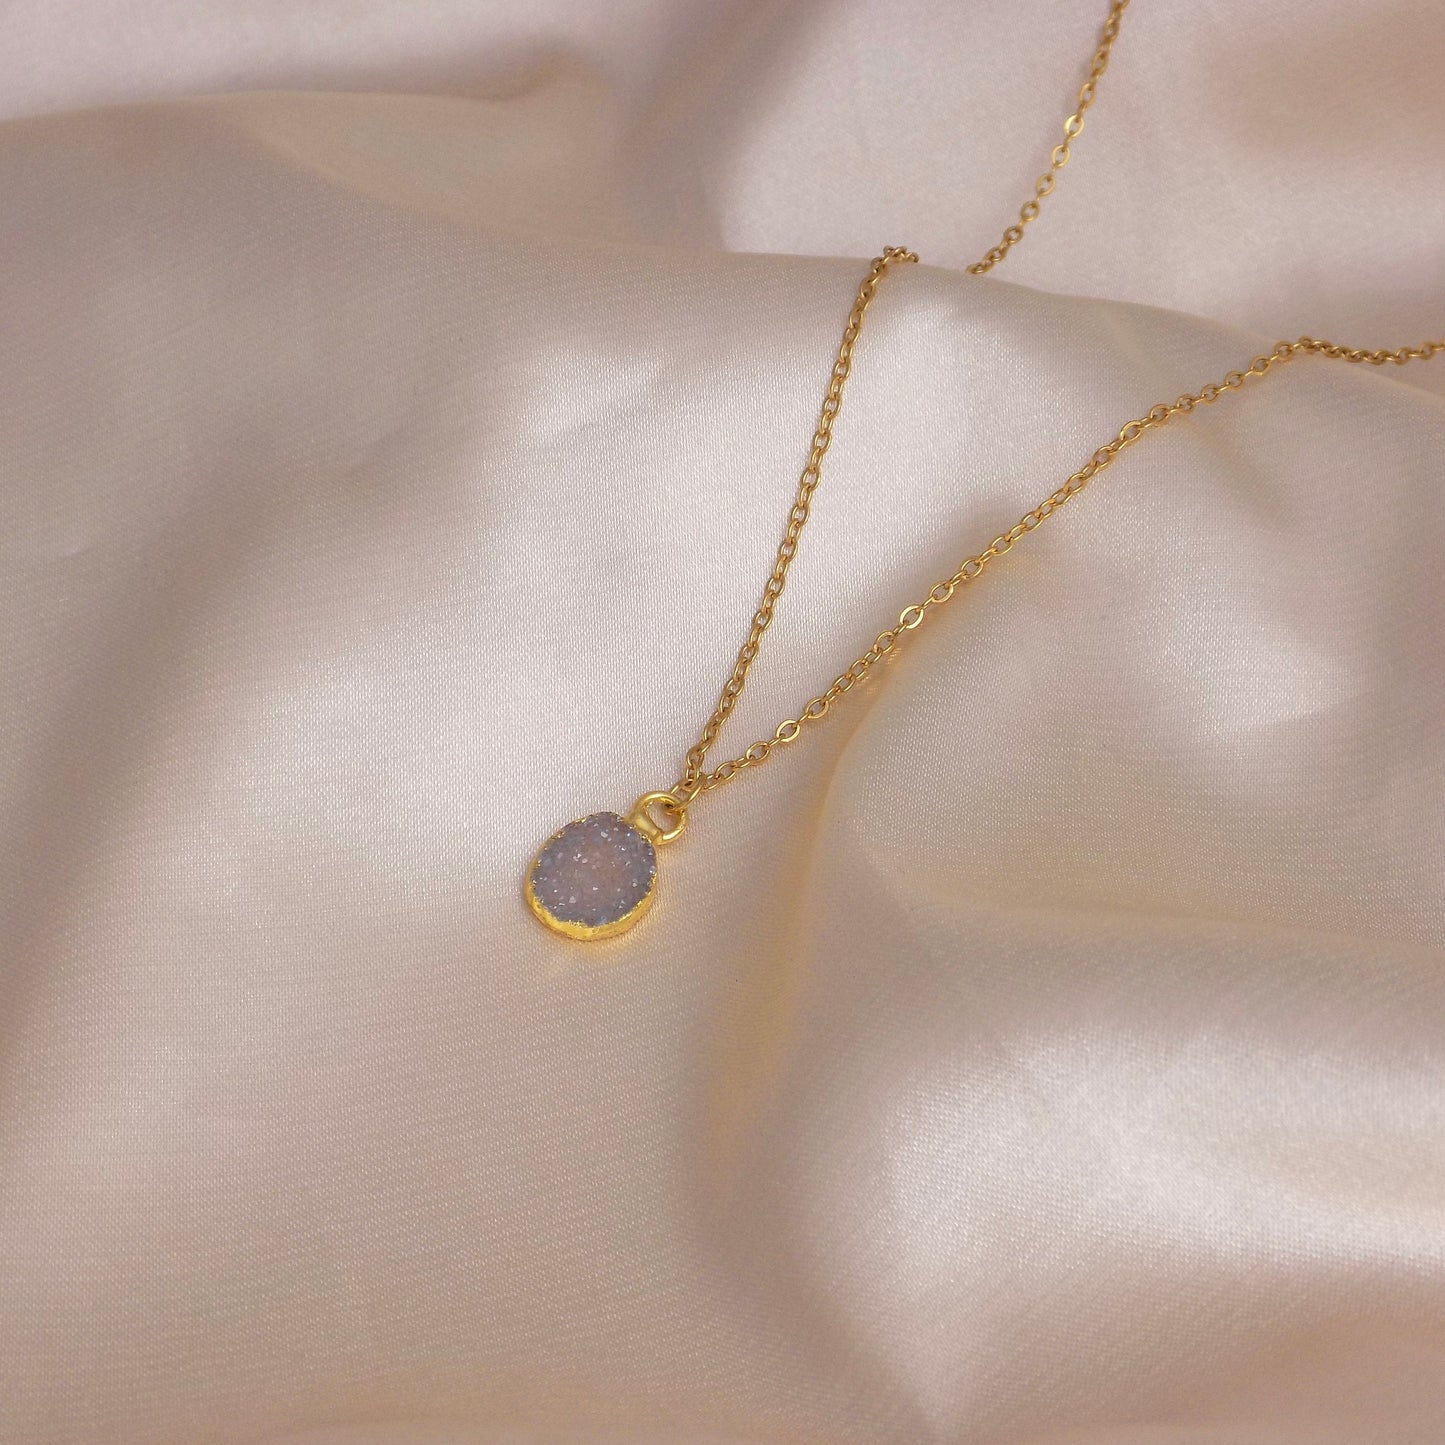 Tiny Natural Druzy Gemstone Necklace on 18K Gold Stainless Steel Chain, G14-797